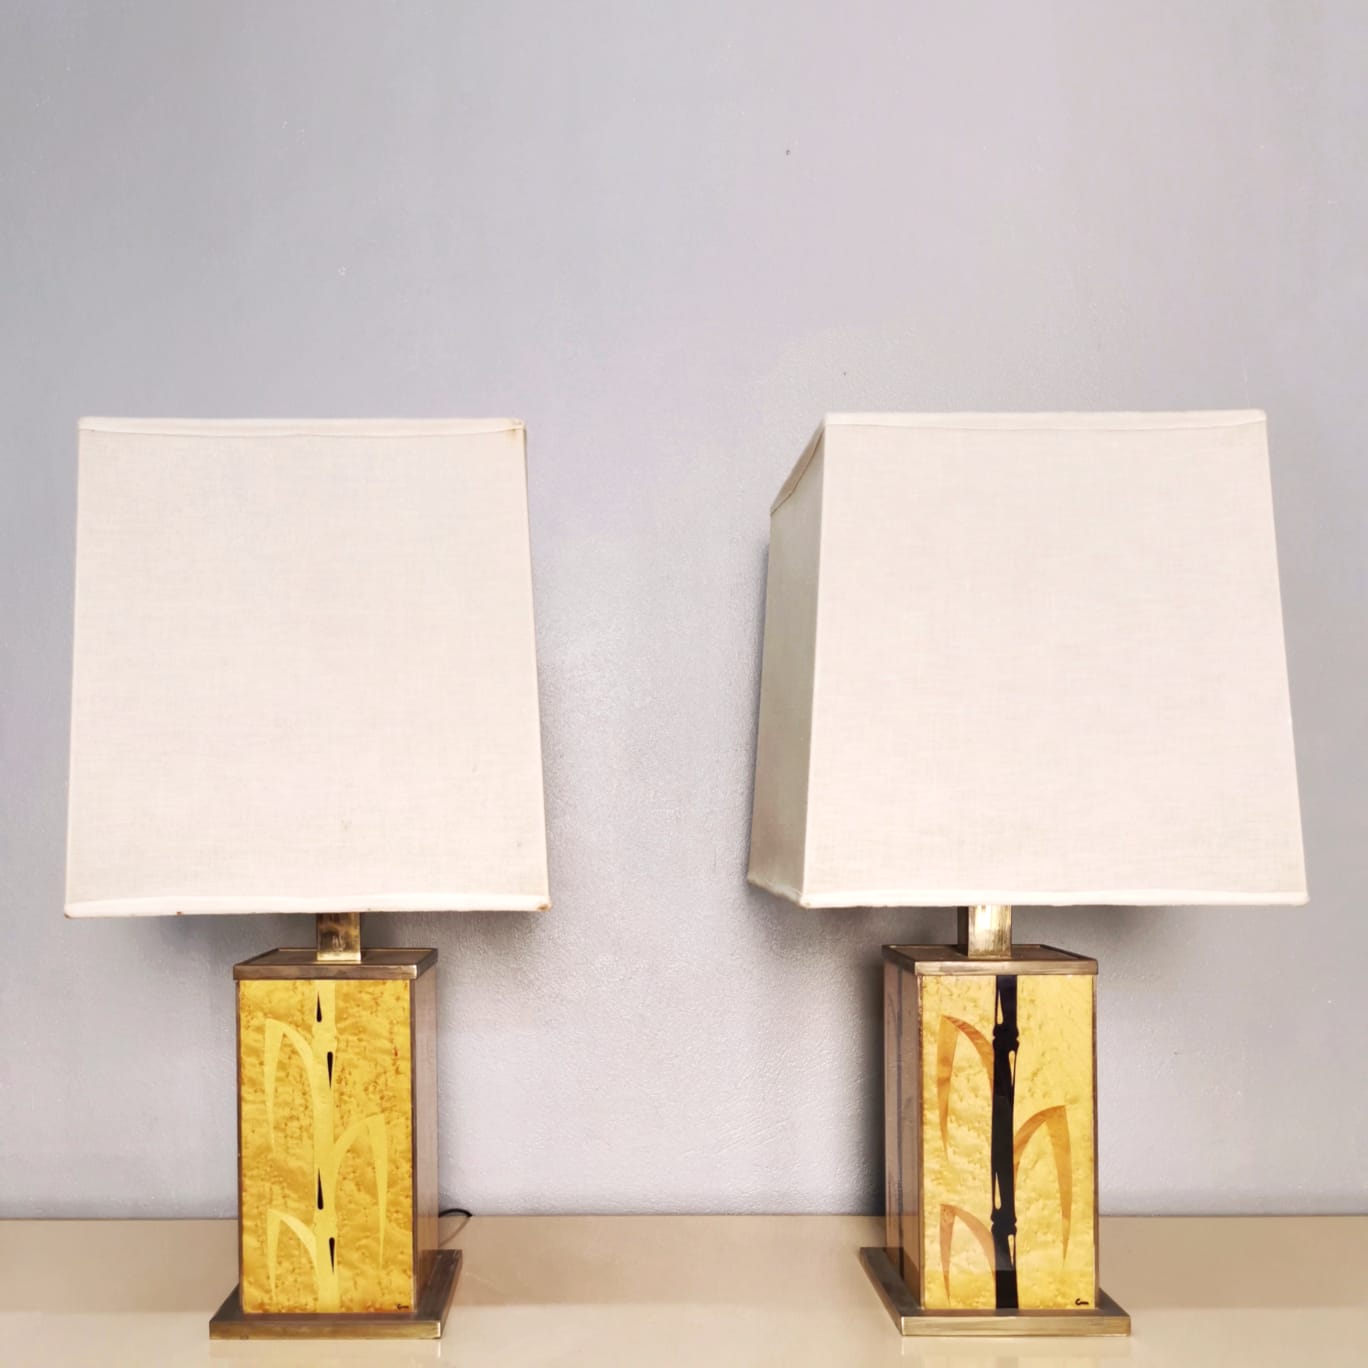 Briarwood and brass lamps from the 70s // SOLD //